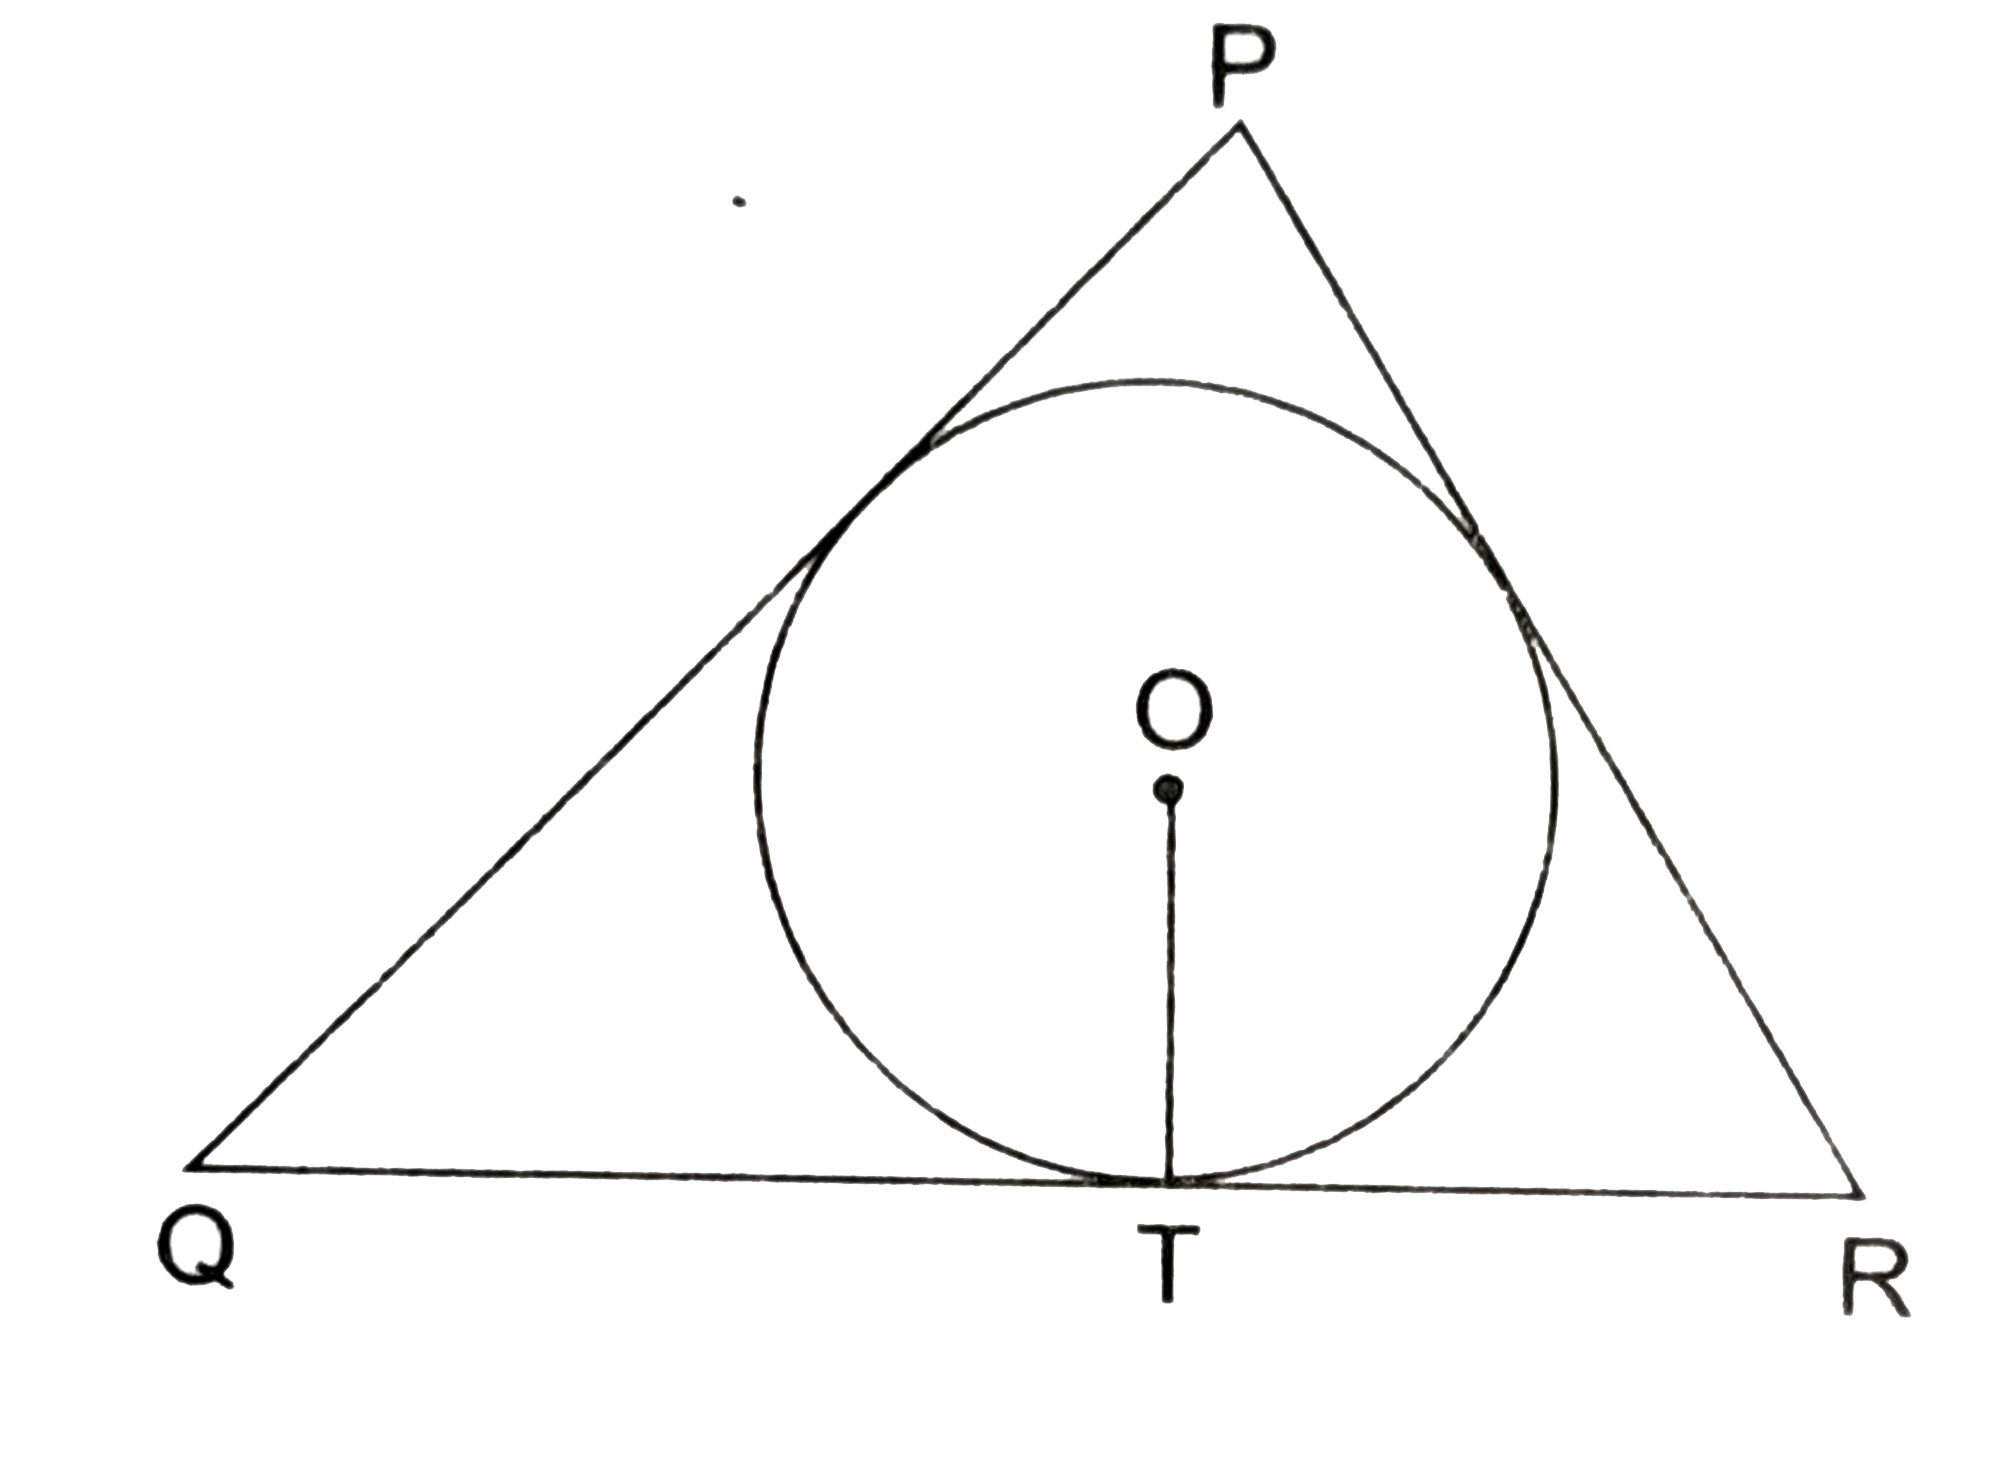 In the given figure, a triangle PQR is drawn to circumscribe a circle of radius 6cm such that the segments QT and TR into which QR is divided by the point of contact T, are of lengths 12cm and 9cm respectively. If the area of DeltaPQR=189cm^(2) then the length of side PQ is